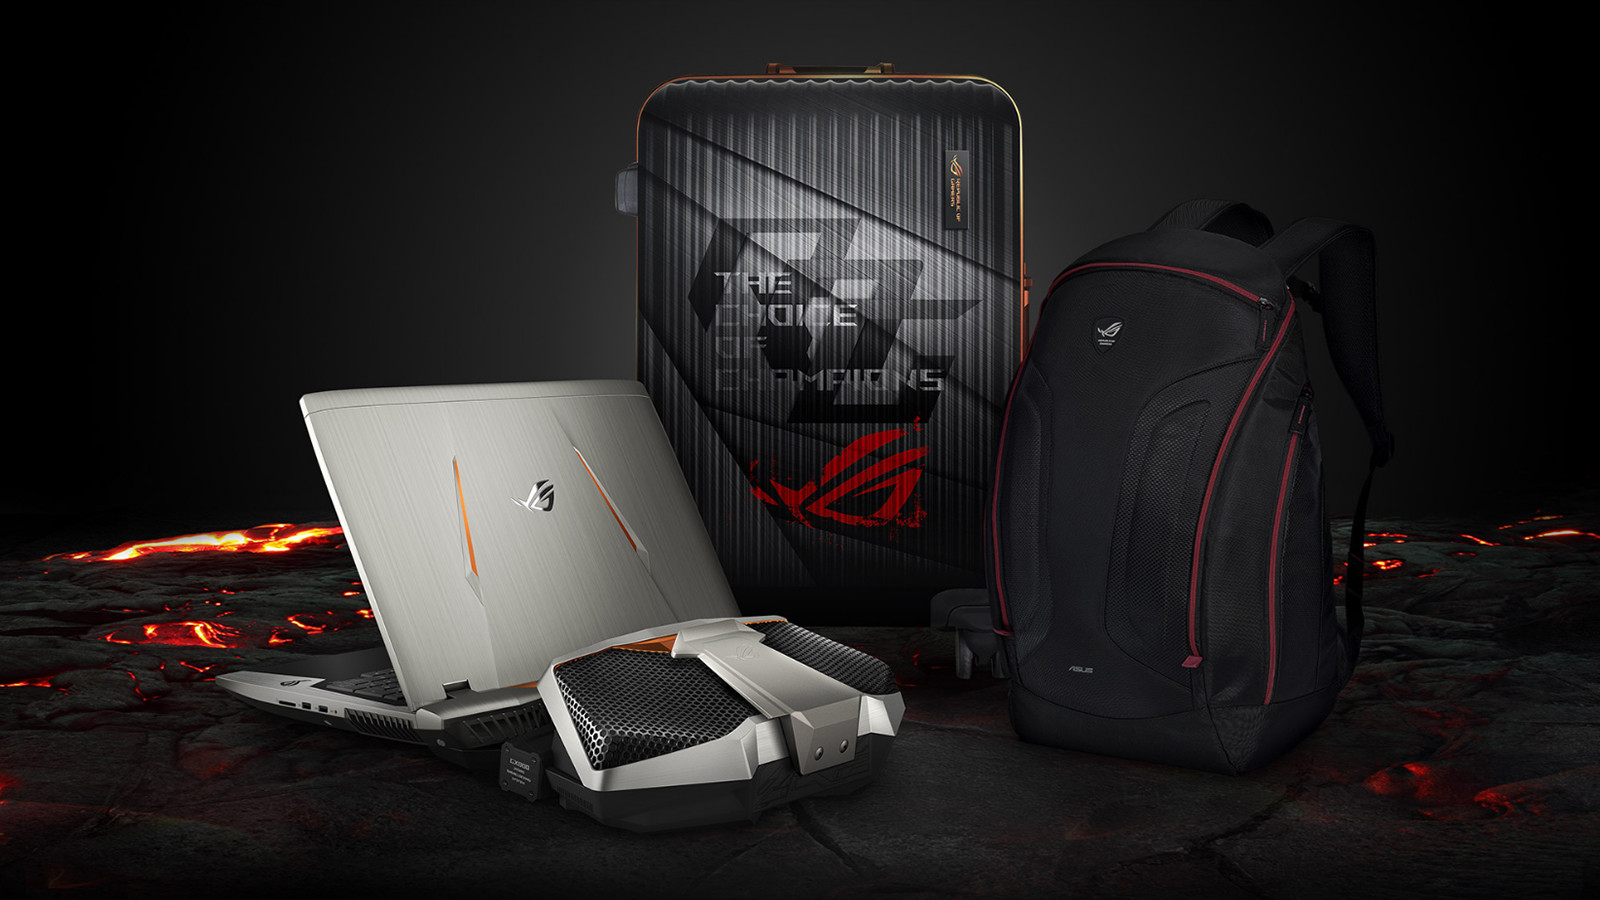 https://www.cowcotland.com/images/news/2016/11/asus-rog-gx800-portable-gamer-watercooling-overclocking-contre-infos-f-12.jpg